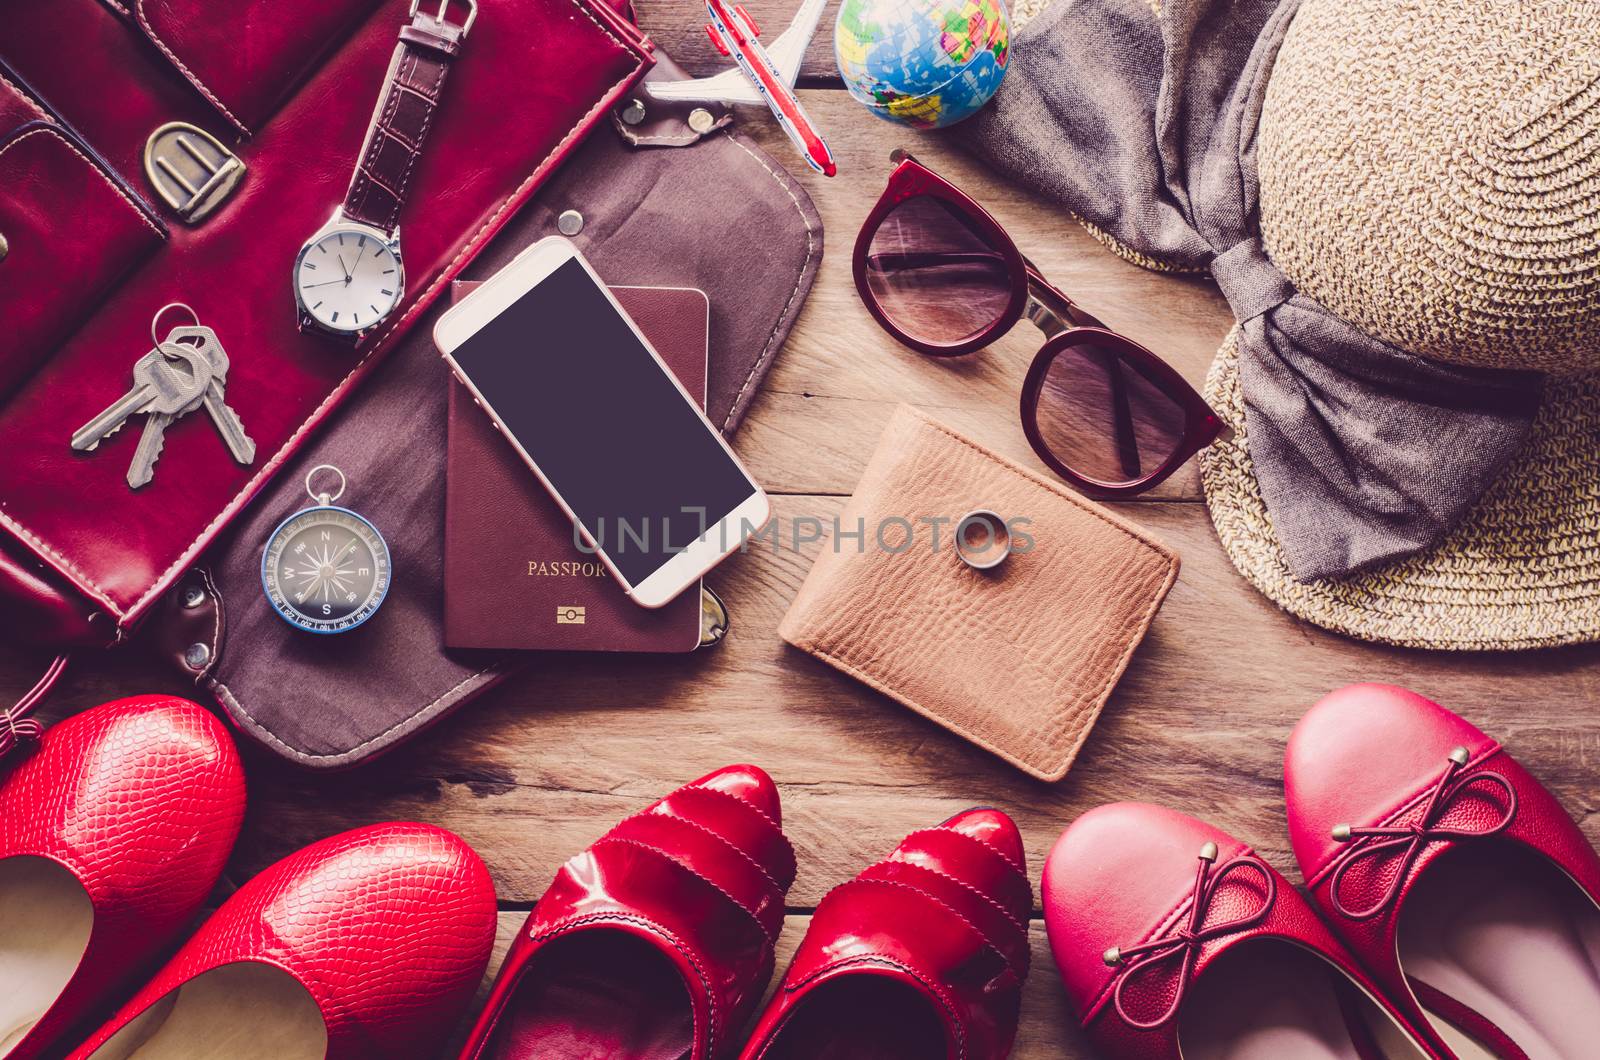 Clothing and accessories for women, placed on a wooden floor.- c by photobyphotoboy